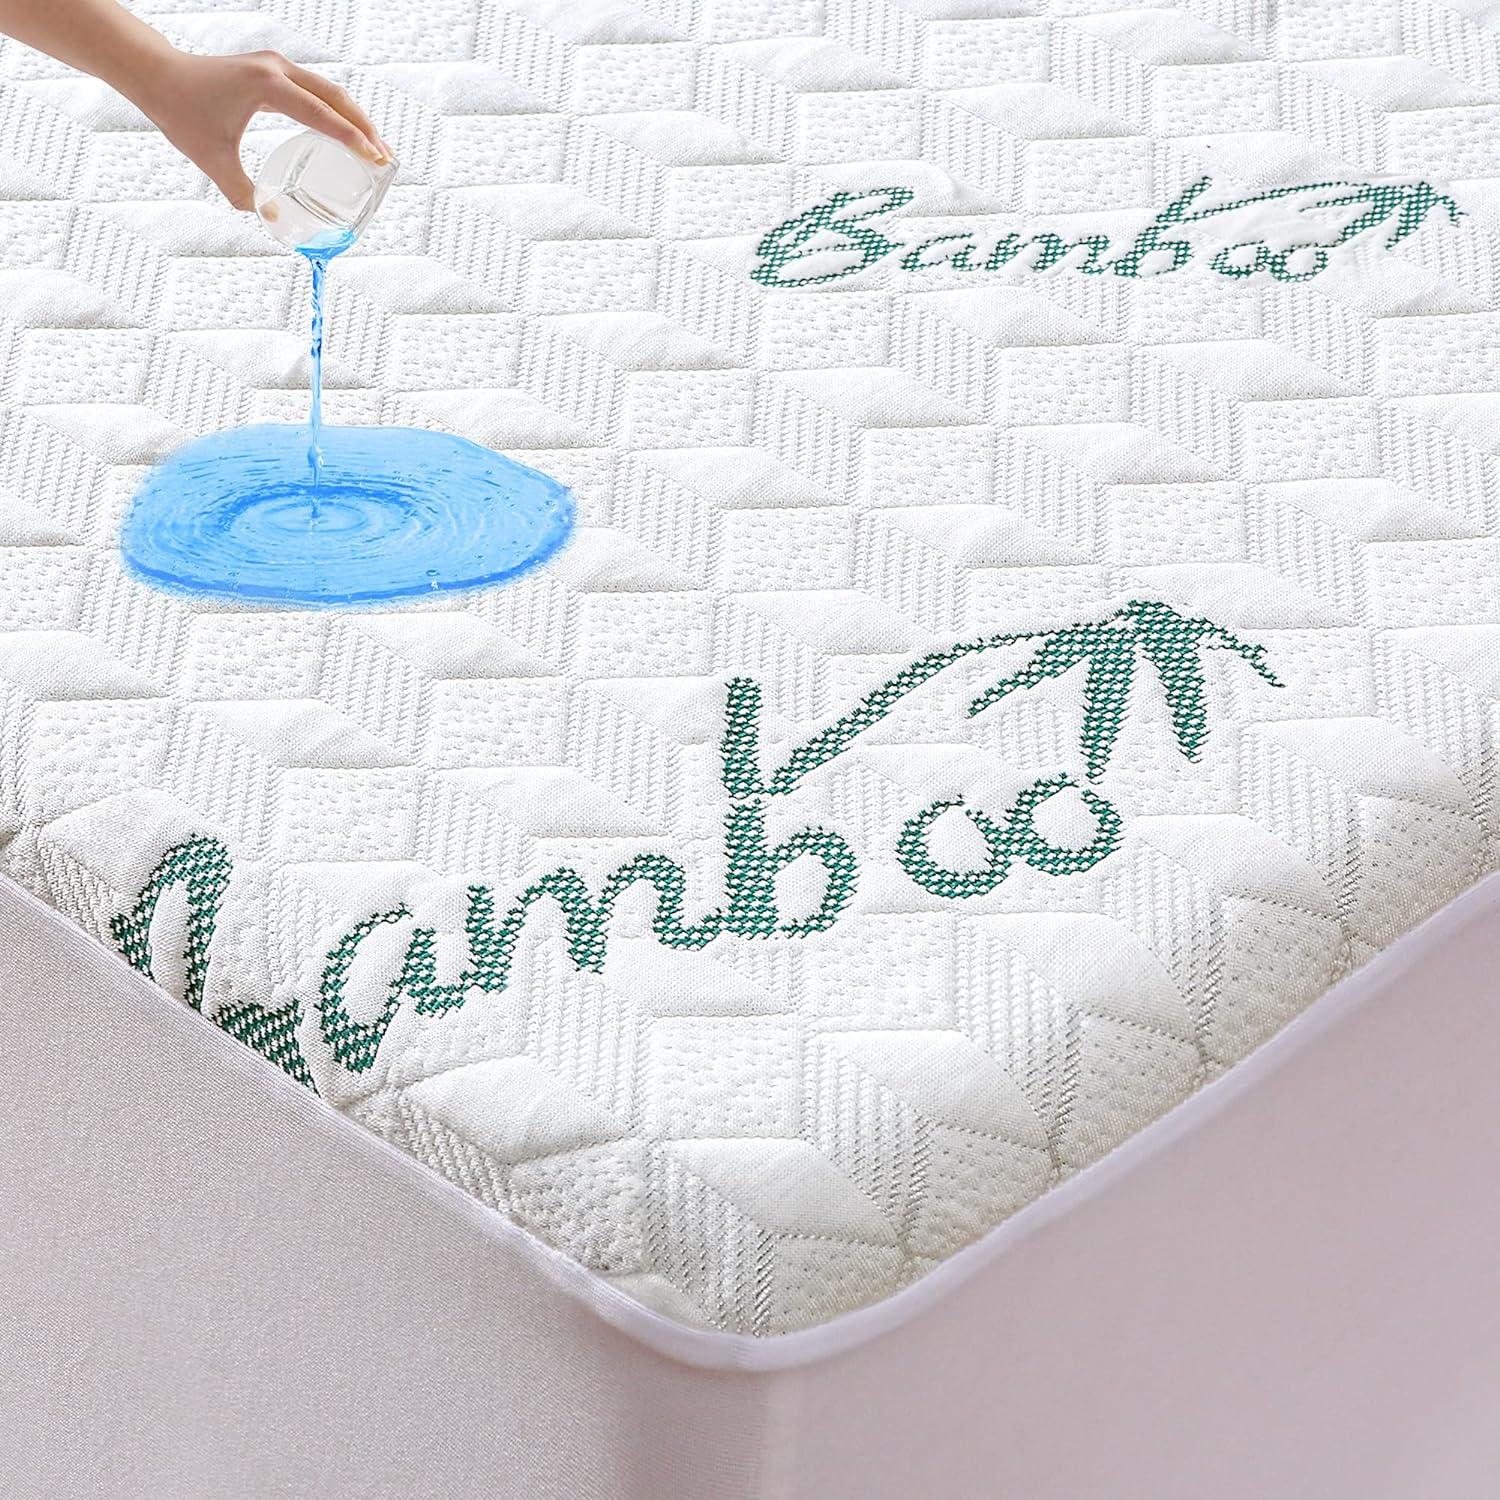 I bought this Bamboo Waterproof Queen Size Mattress Protector because I just bought a brand-new Queen-Size Mattress. This fits my mattress perfectly (no slipping off the mattress~stays snug). I wanted something Waterproof because I always have a bottle of water lying next to me in bed & I didn't want to take any chances of the water bottle leaking onto my Mattress & damaging it. This provides the Waterproof protection I was looking for & it DOESN'T make any weird noises when you move around like